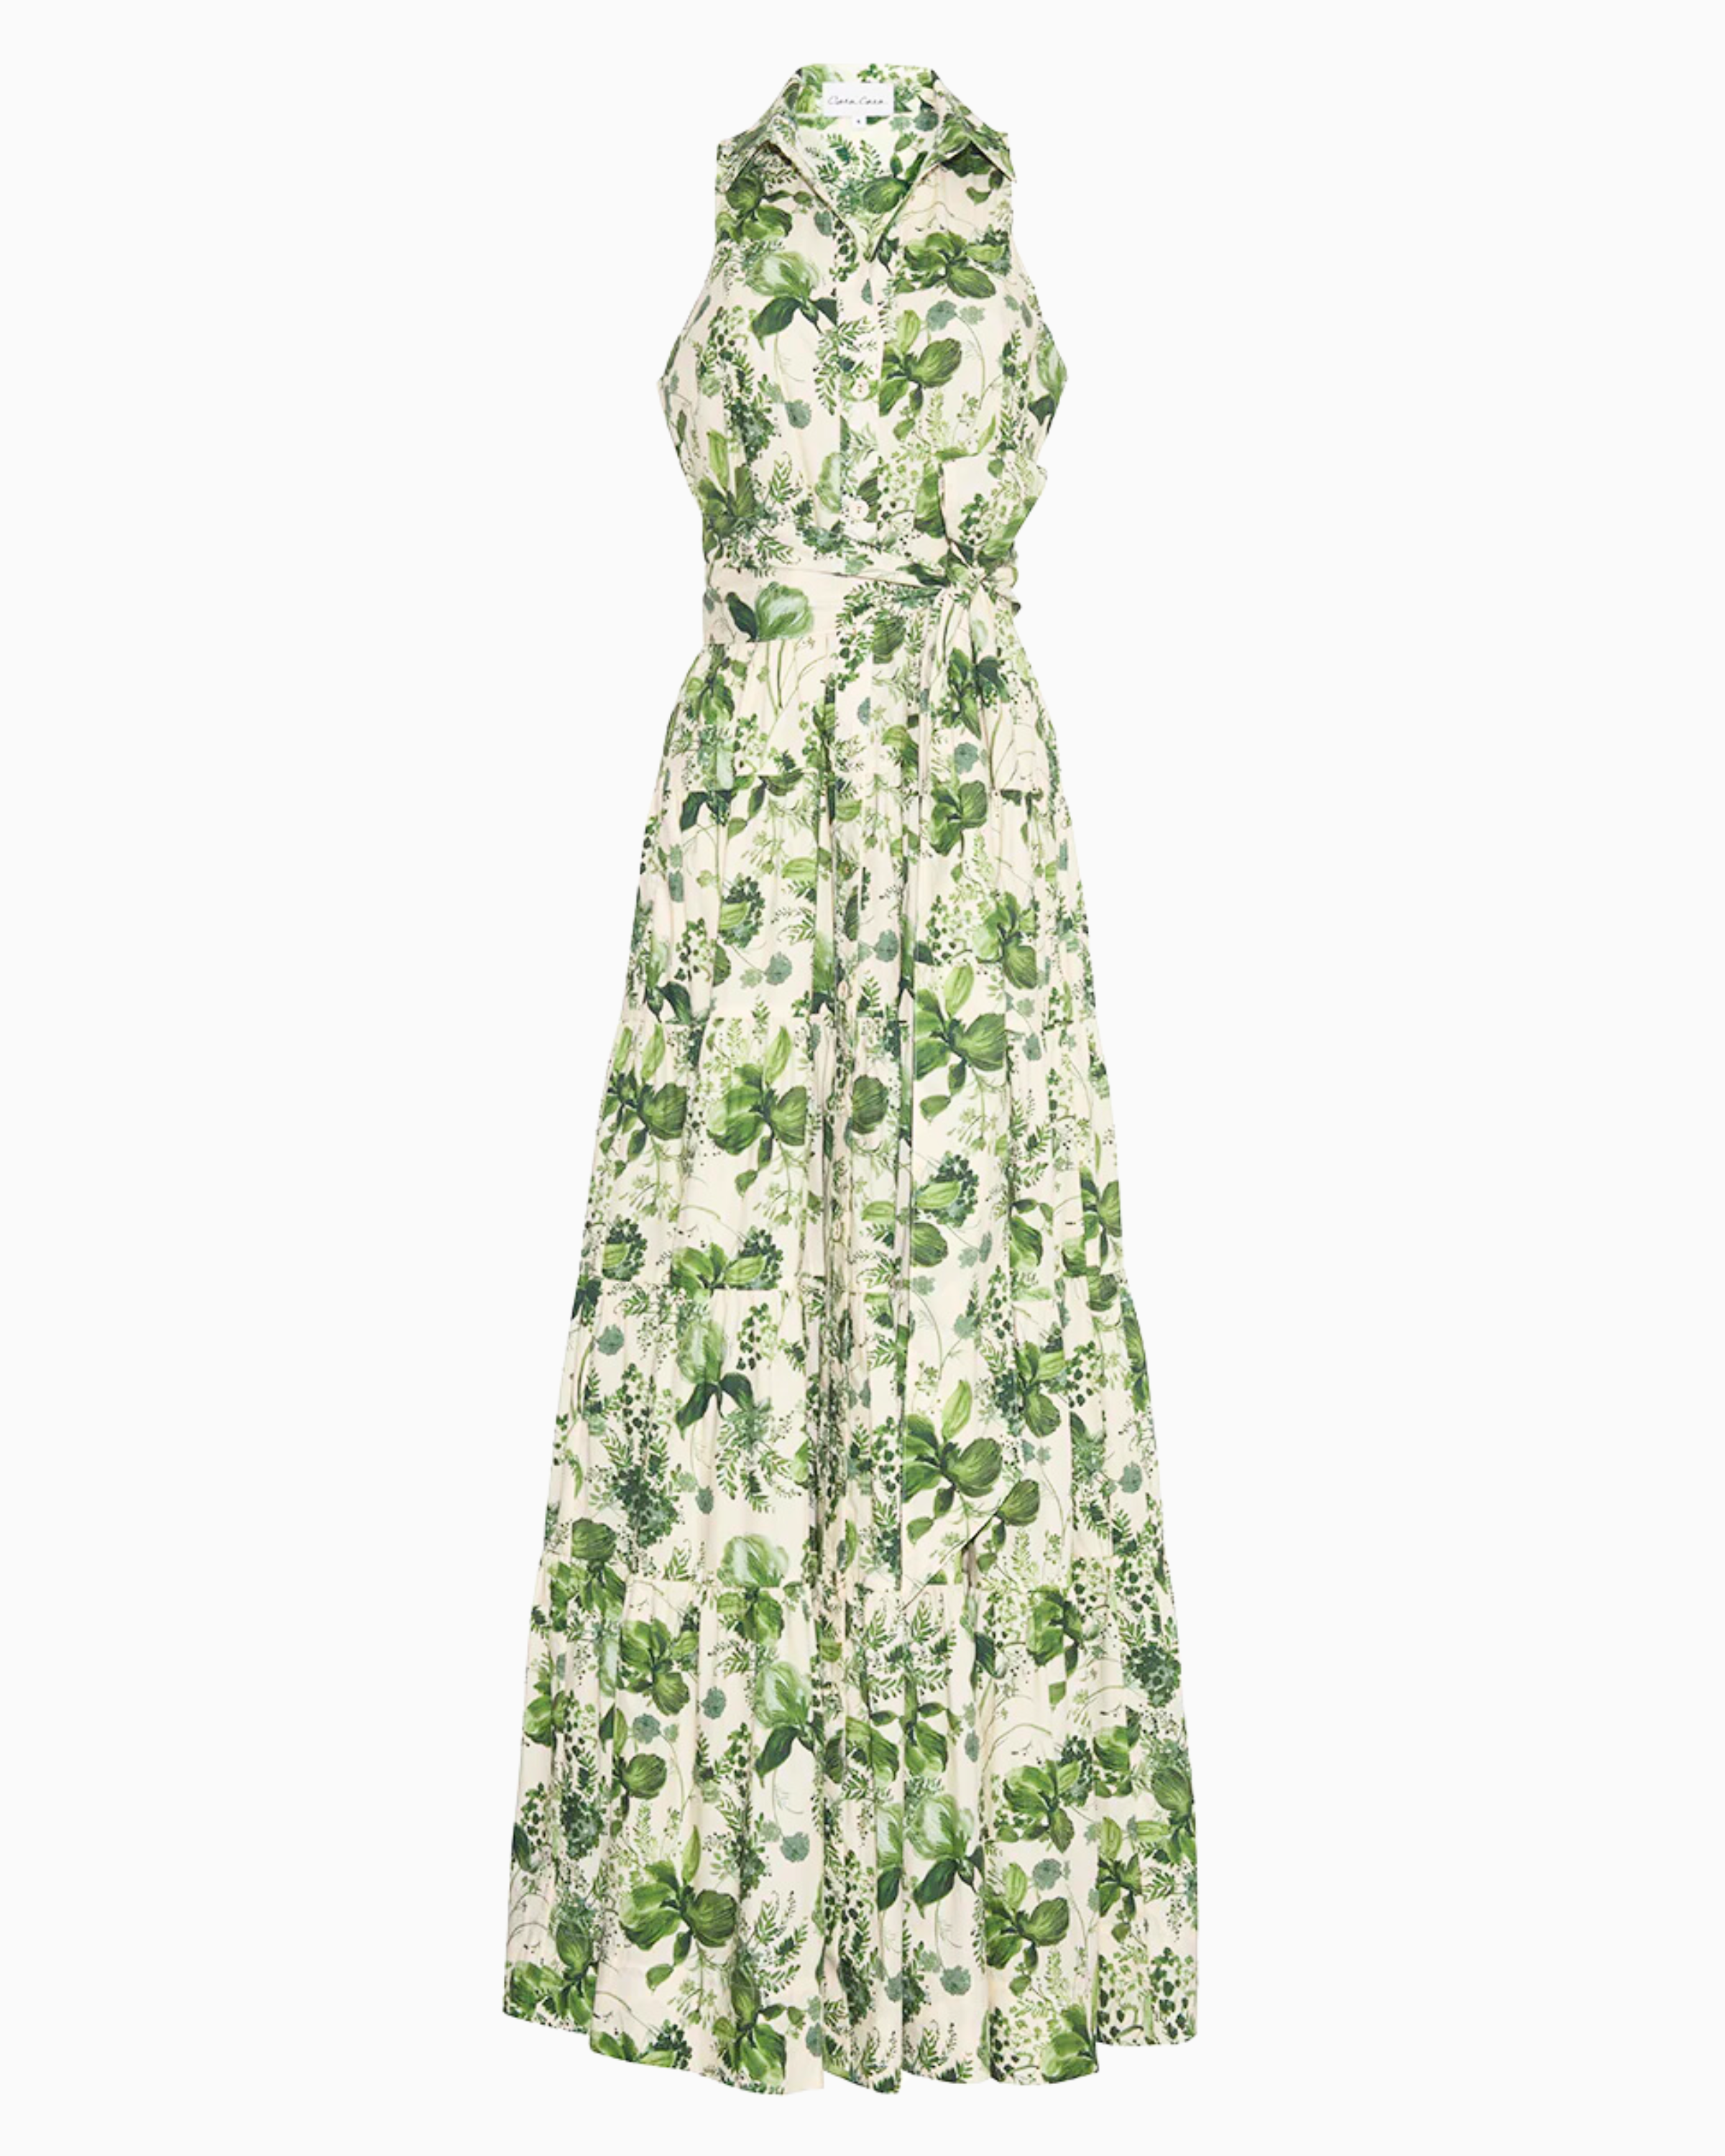 Cara Cara Adriana Dress in Olive Hanging Orchids